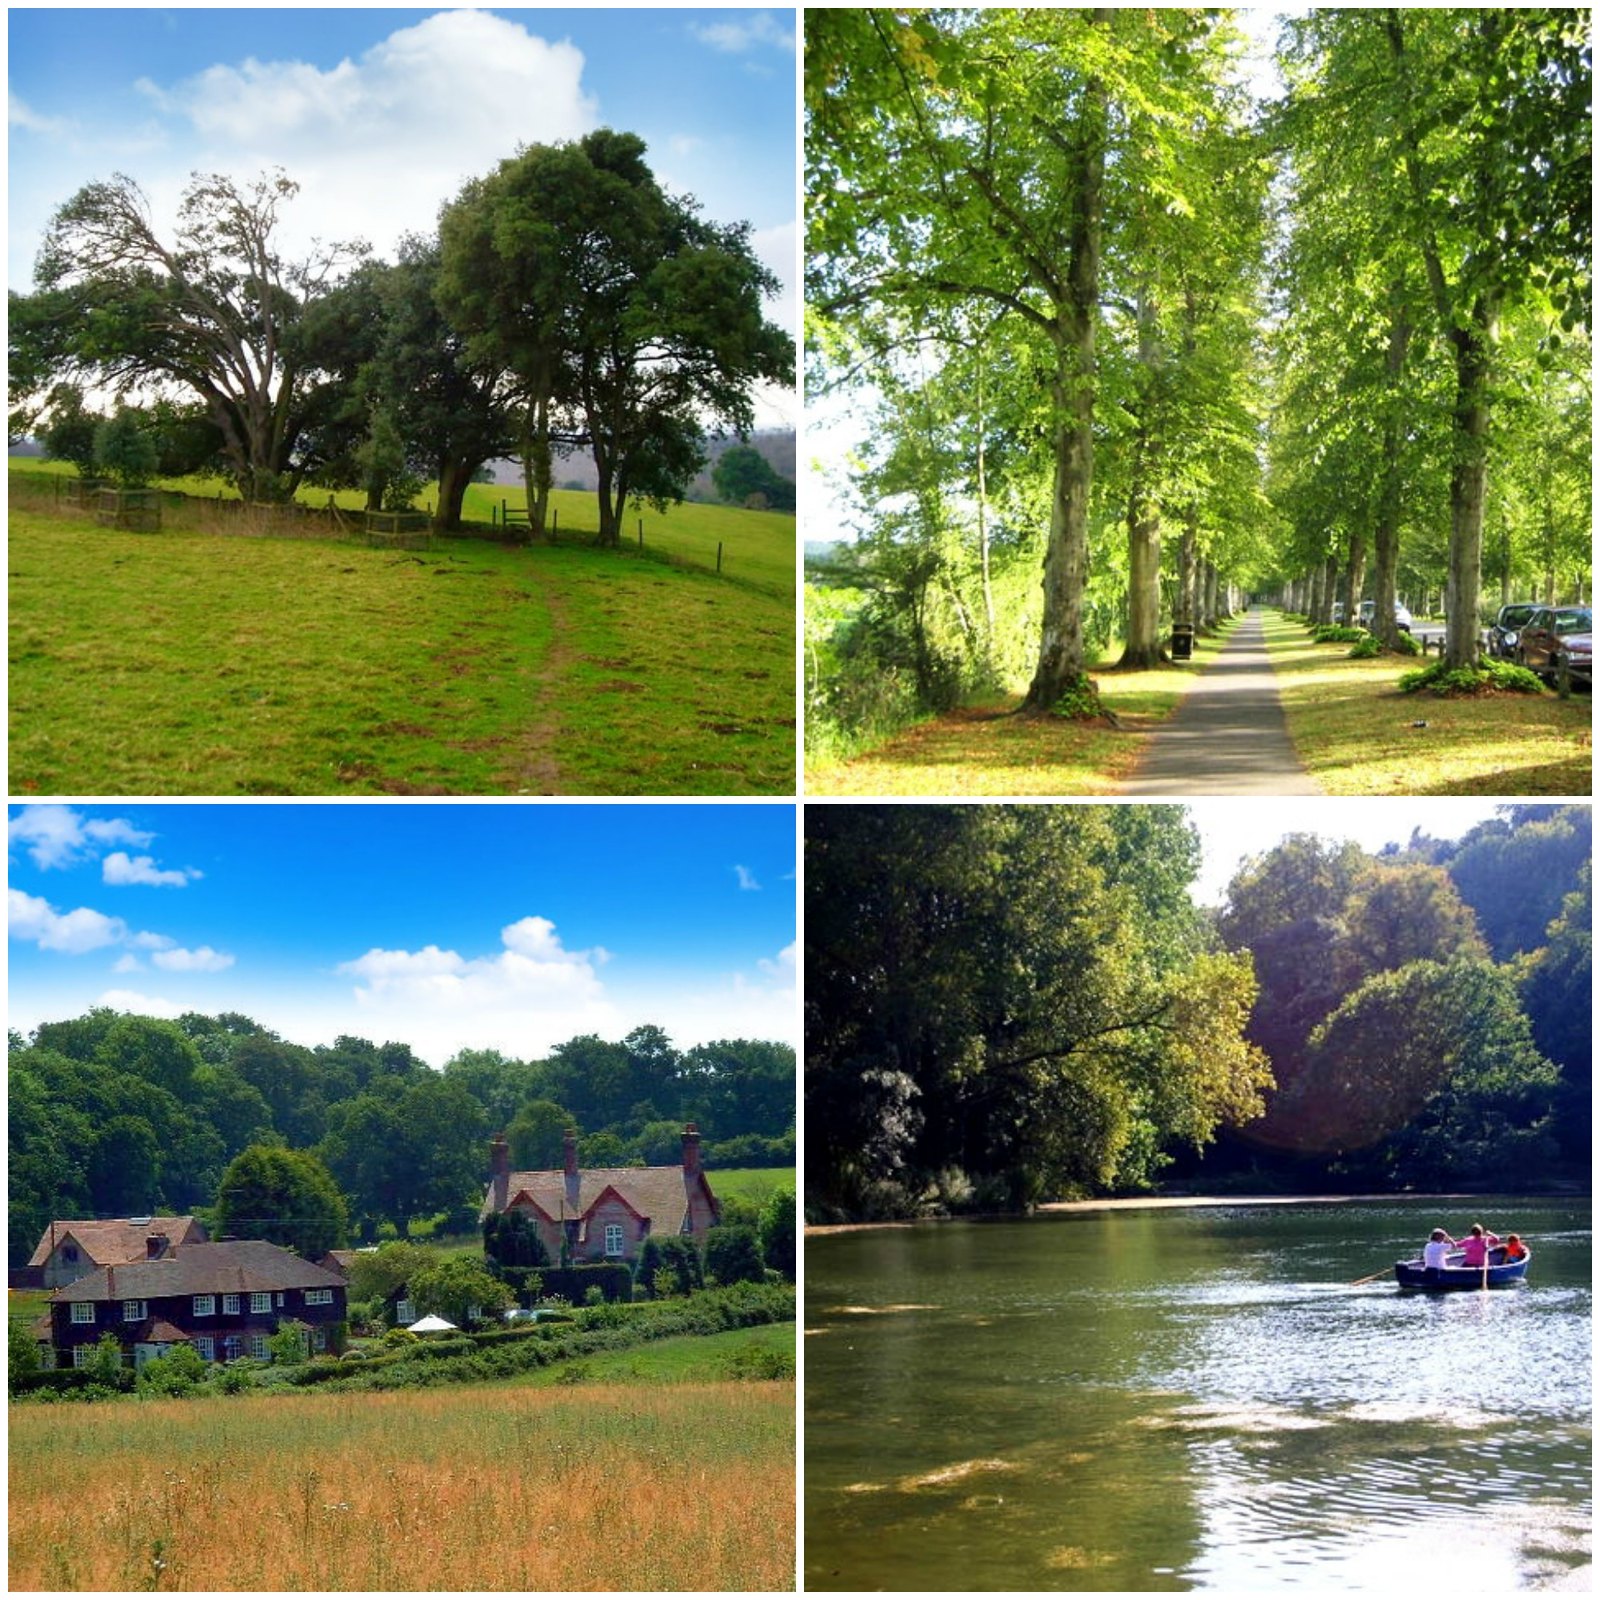 Top right clockwise. Monarch's Way. (Credit Peter Holmes); Mill Road lined with lime trees on both sides (Credit Nigel Cox); Houses at Crossbush (Credit Chris Shaw); Row boats out on Swanbourne Lake (Credit Shaun Ferguson).jpg